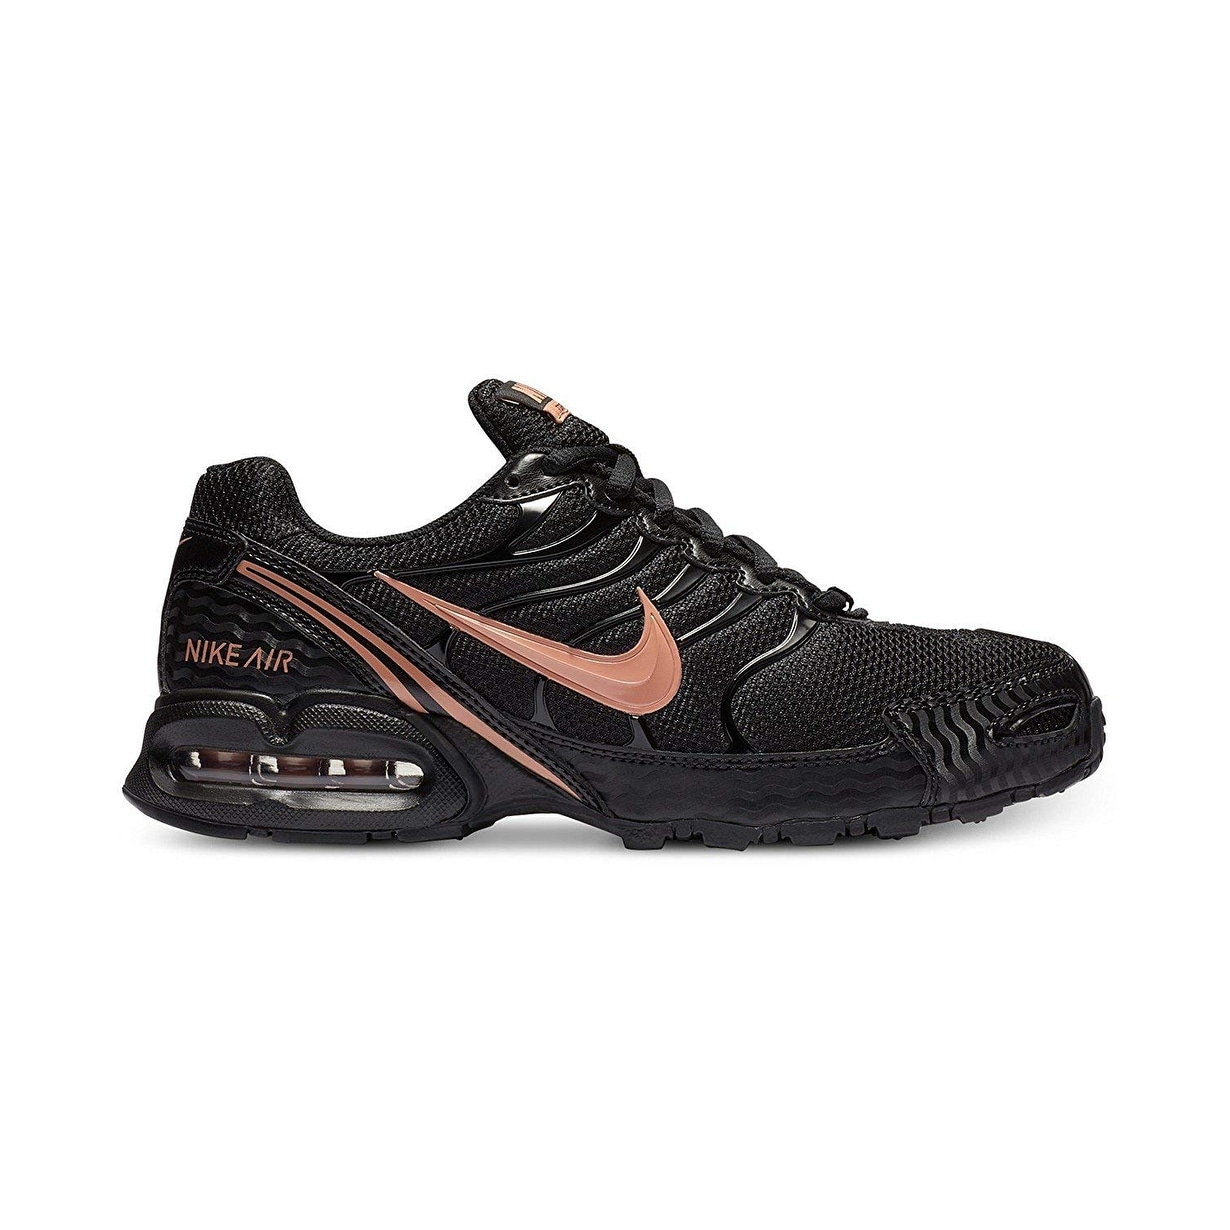 nike shoes rose gold and black